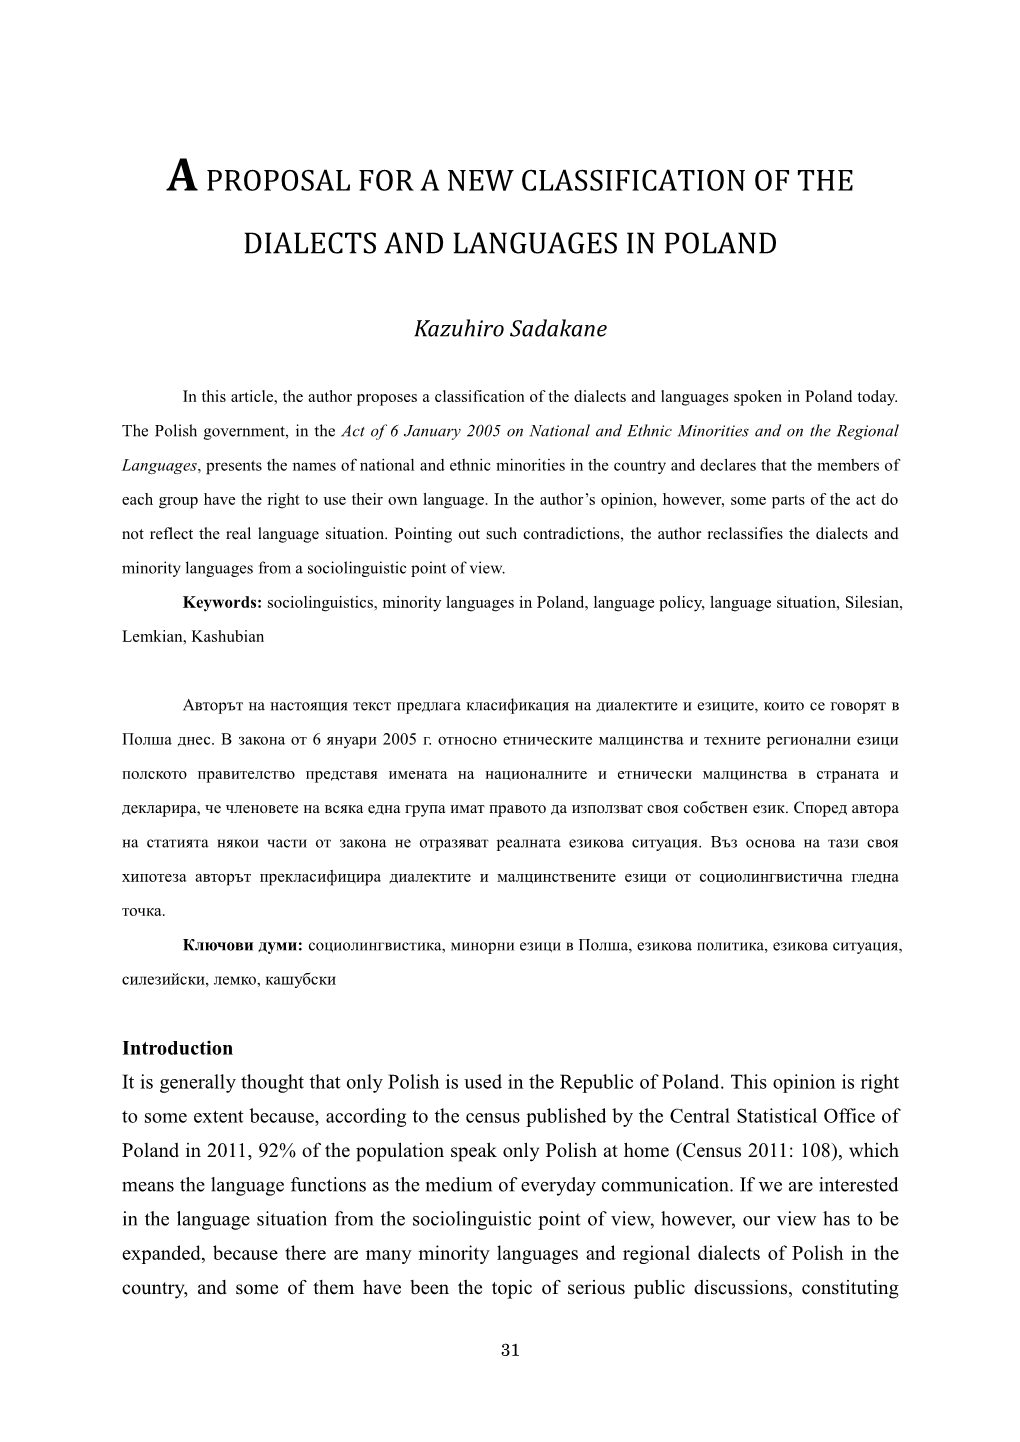 Aproposal for a New Classification of the Dialects and Languages in Poland